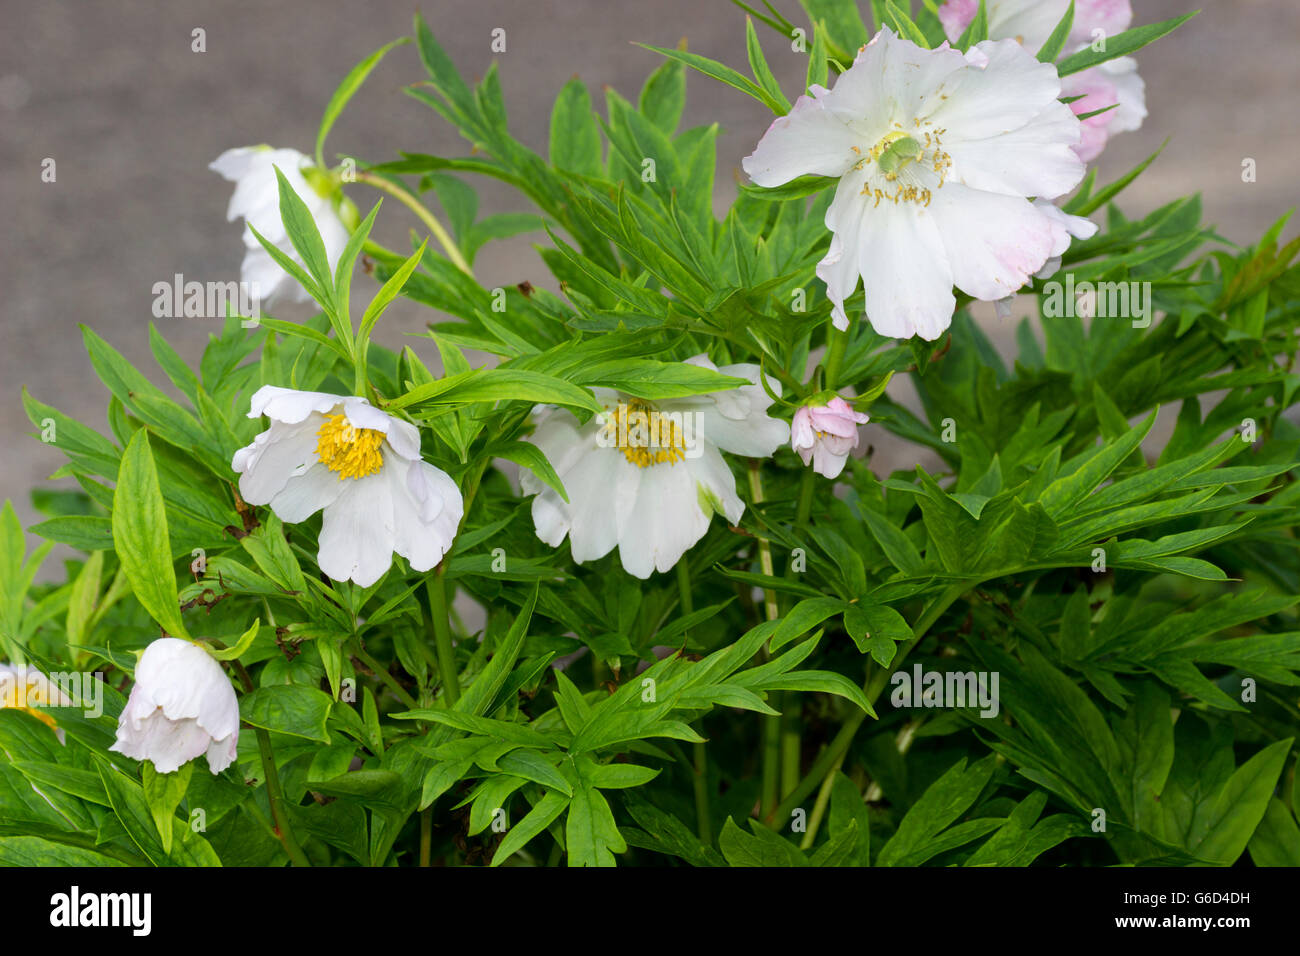 Drooping white flower of the compact species peony, Paeonia veitchii var. woodwardii 'Alba' Stock Photo